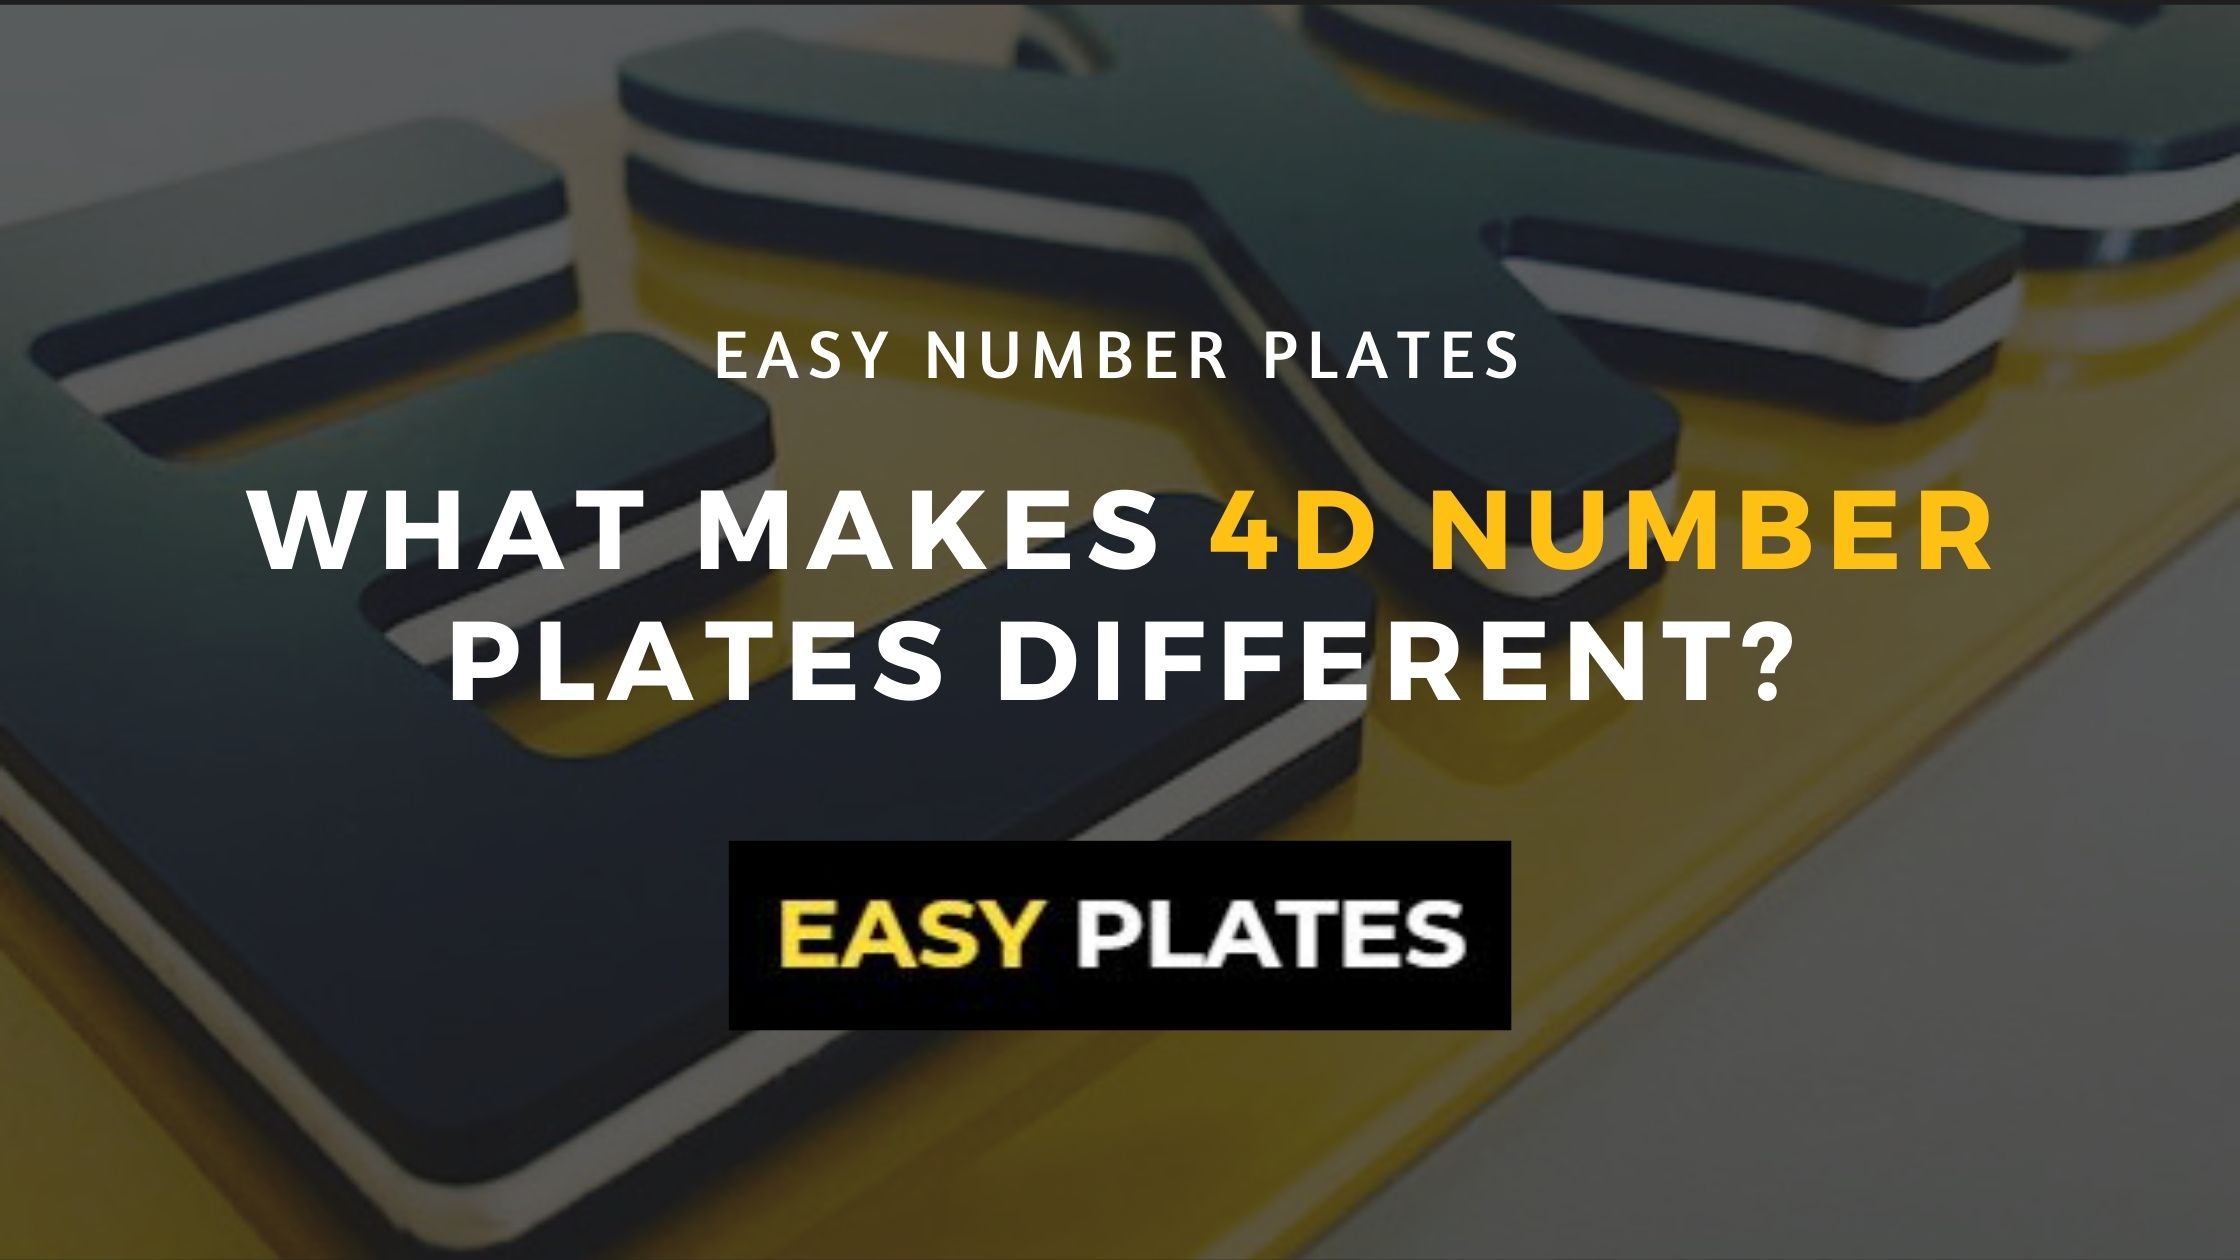 What Makes 4D Number Plates Different?